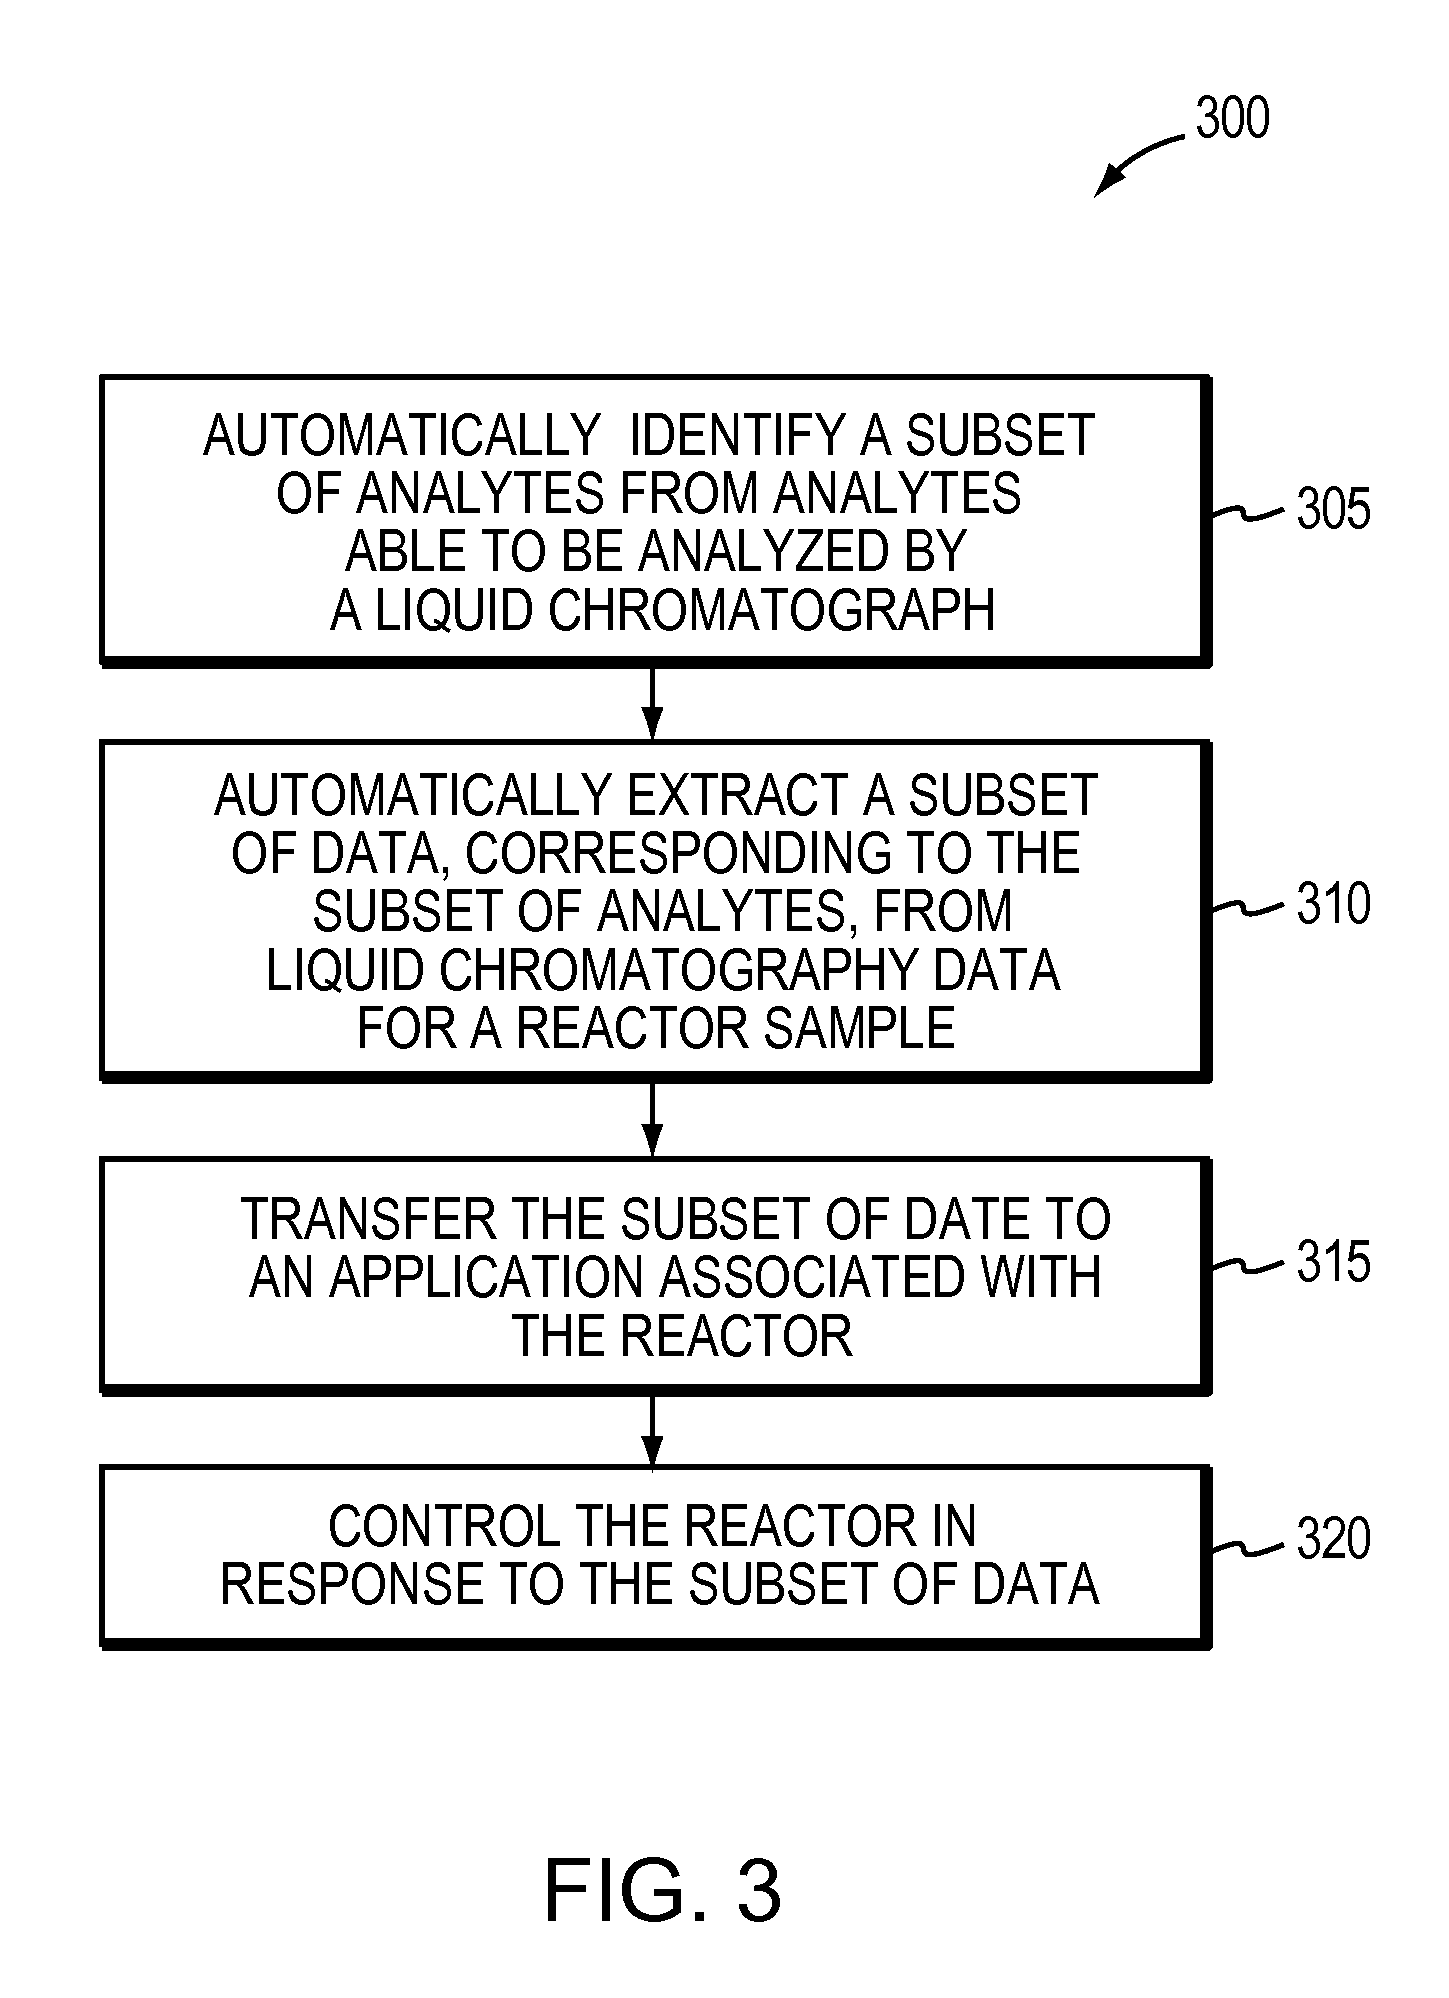 Methods and systems for identification, extraction, and transfer of analytical data for process control